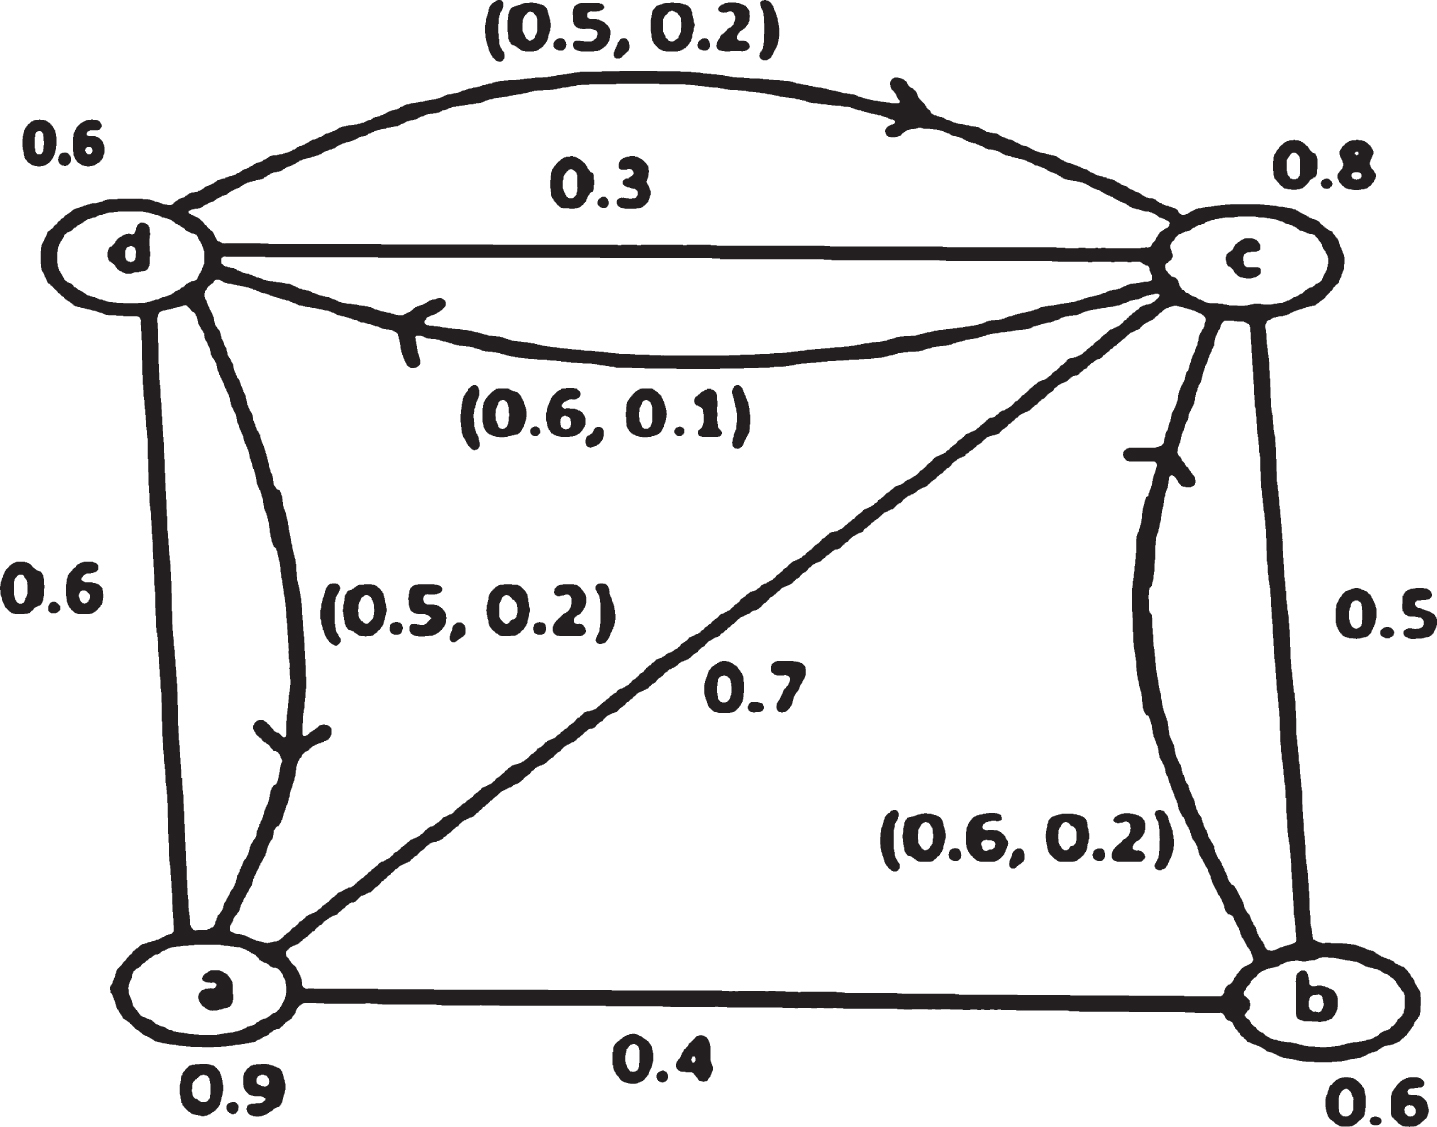 Example of a fuzzy mixed graph.